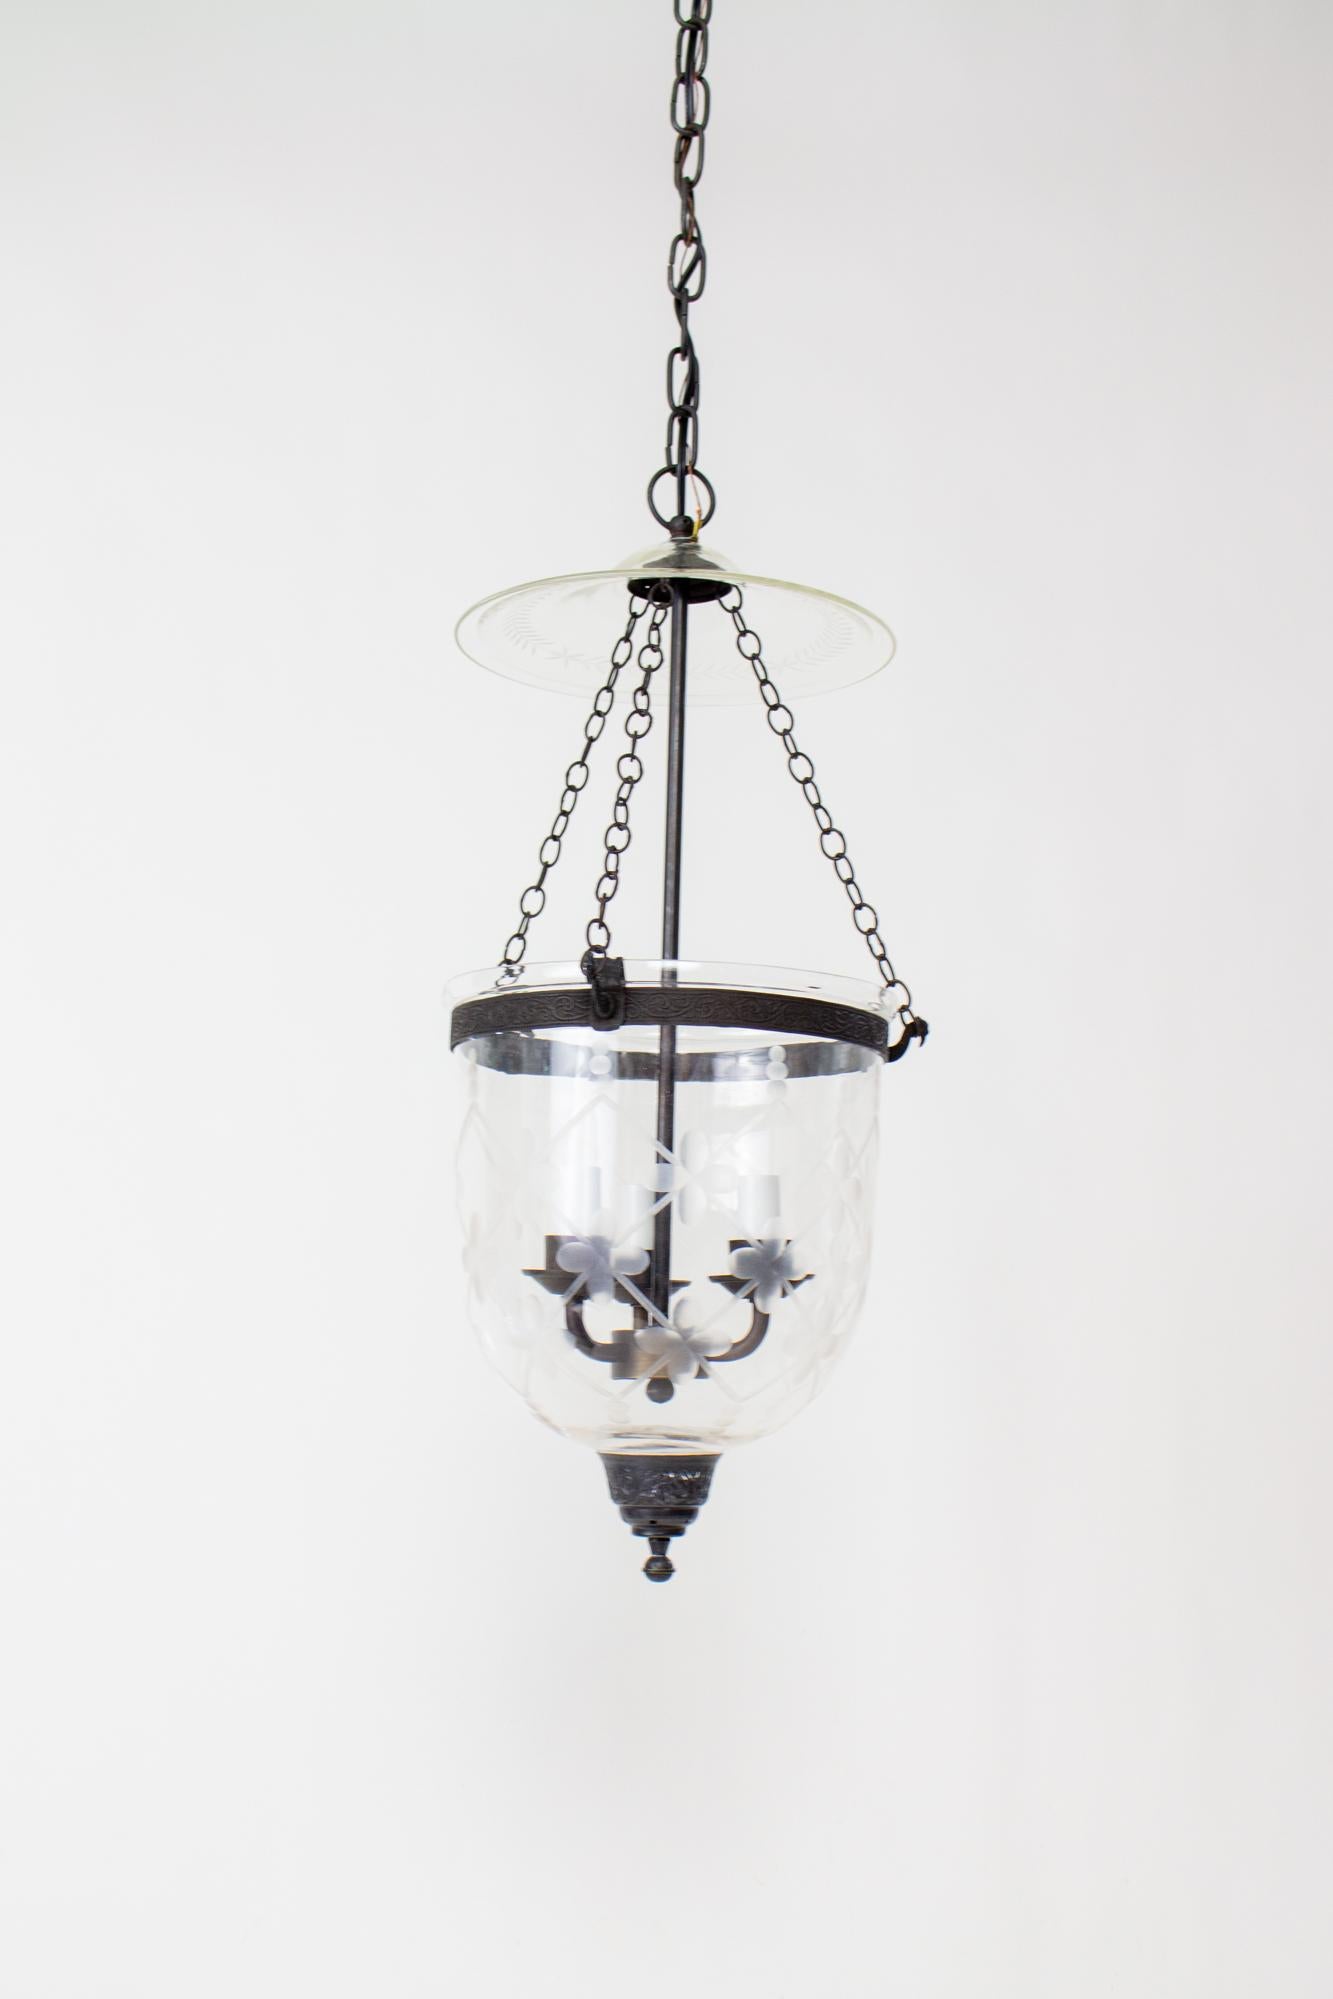 Clear lattice cut glass bell jar with darkened brass finish. Bell jar lanterns first reached popularity in colonial India and due to their lingering popularity, production has continued to the present. Made from delicately blown clear glass with a